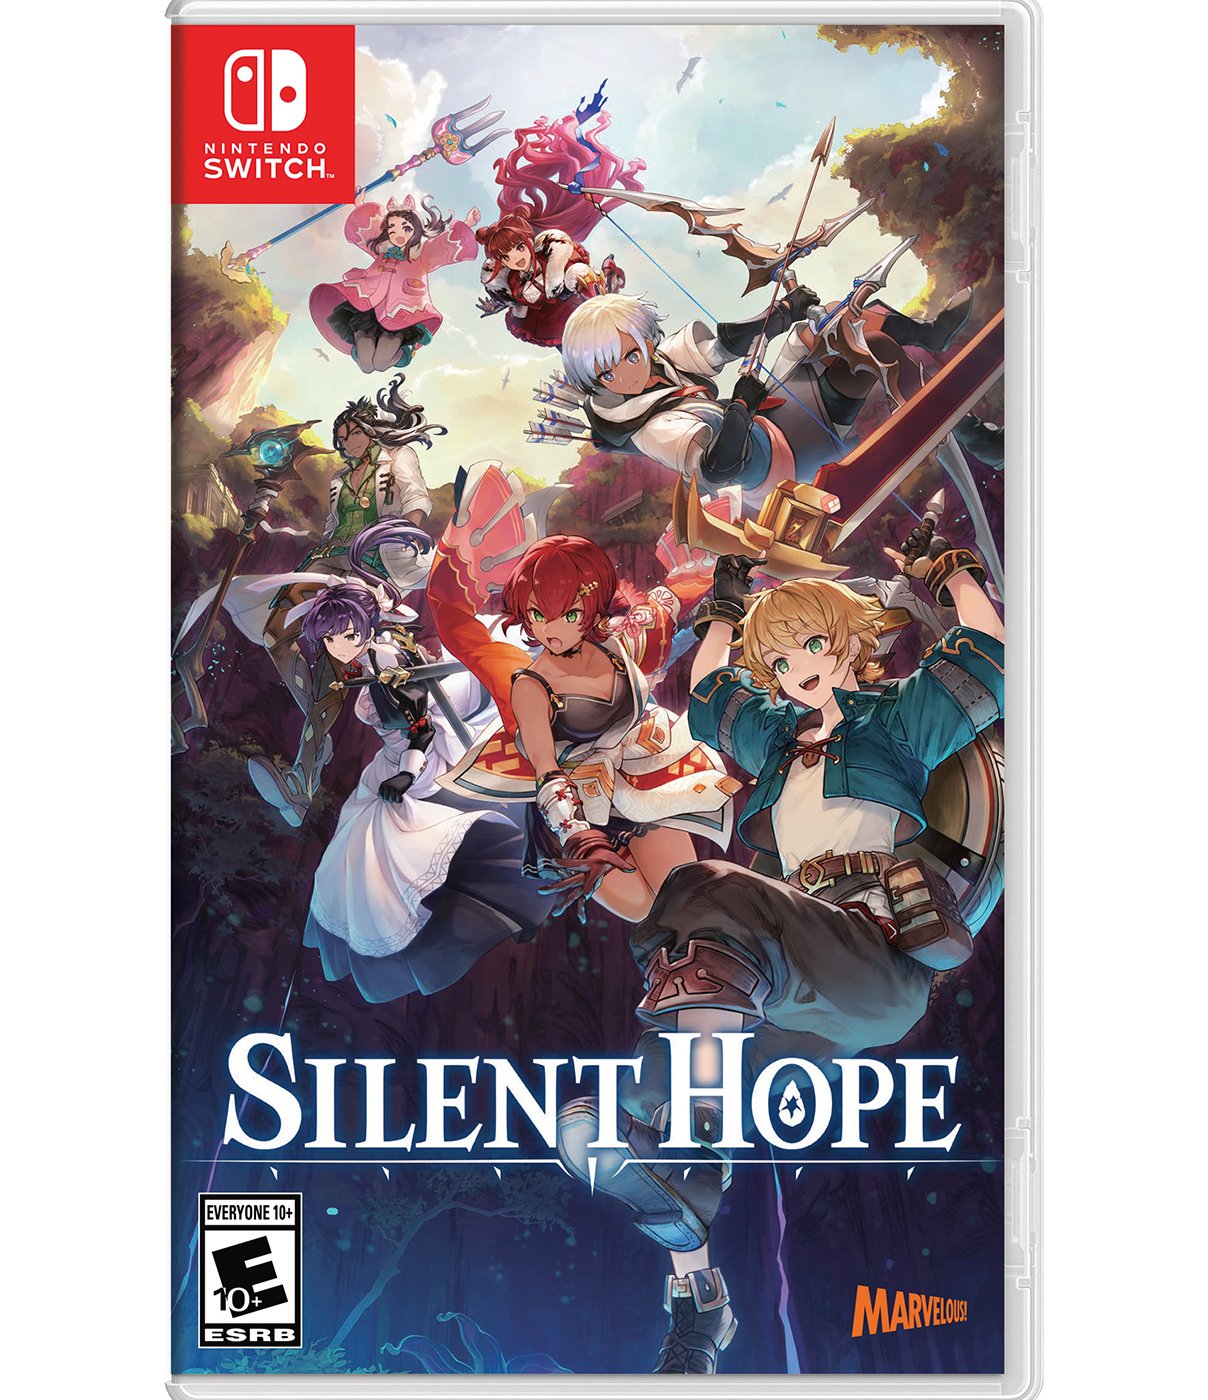 Free Demo for Silent Hope Available Now